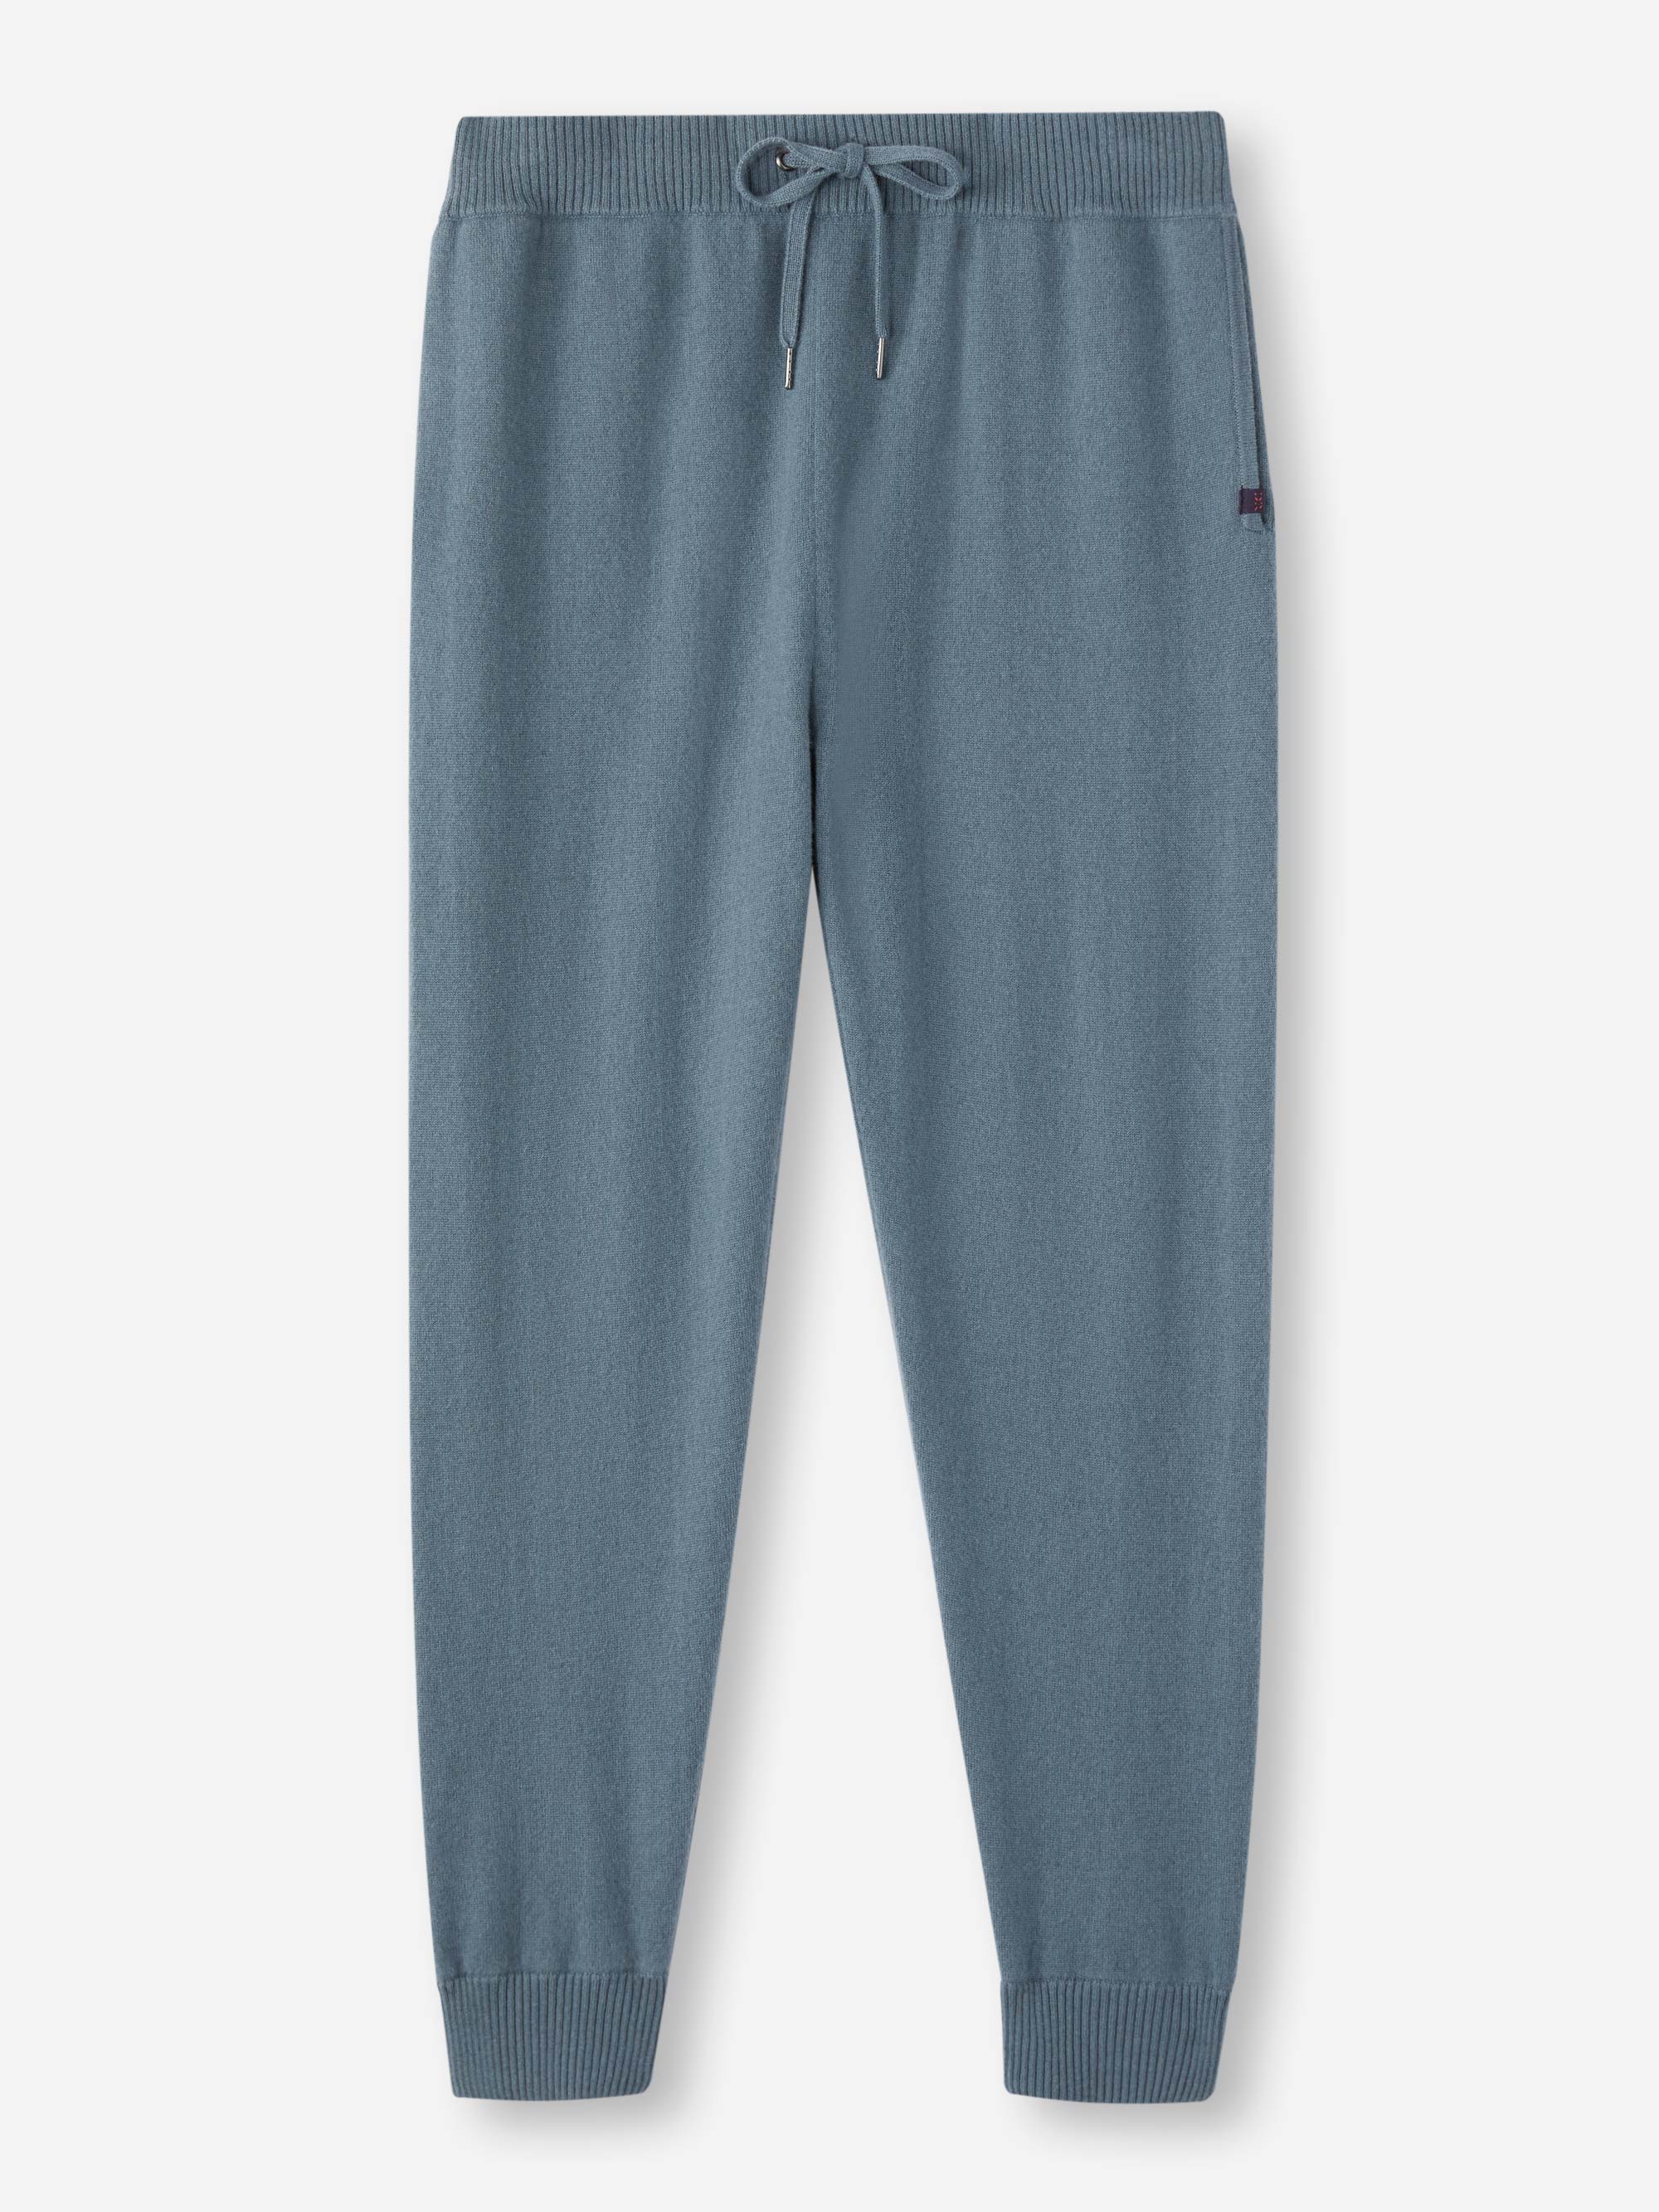 Uniqlo Singapore - Made from stretchy material, these Jogger Pants